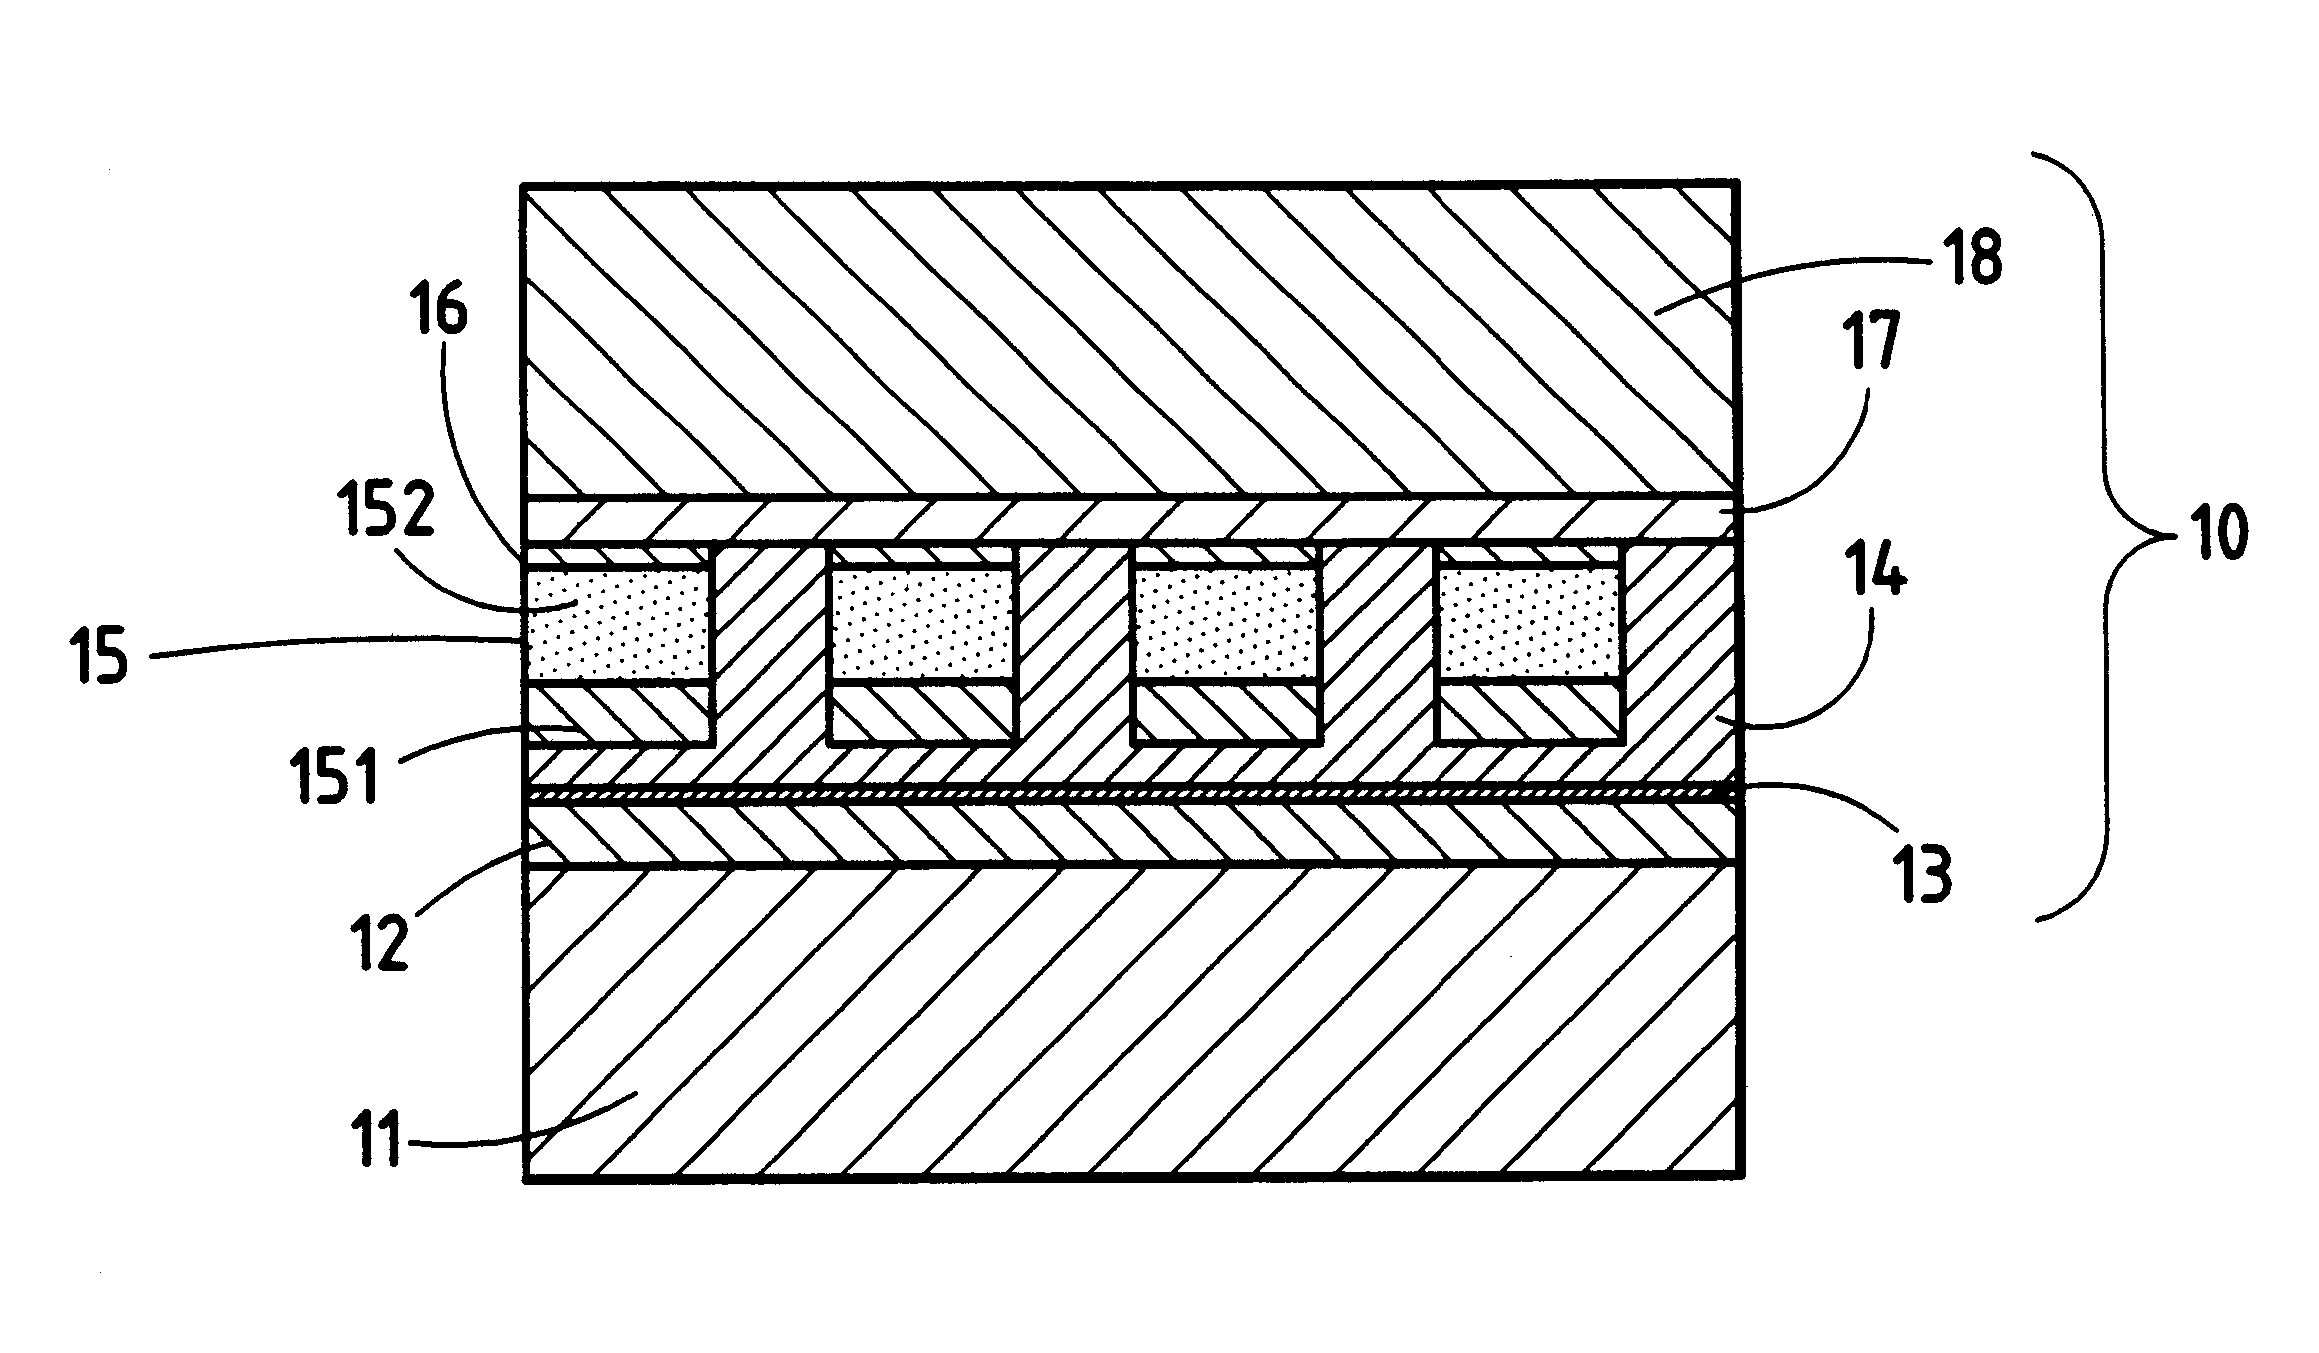 Method of manufacturing a high heat flux regenerative circuit, in particular for the combustion chamber of a rocket engine